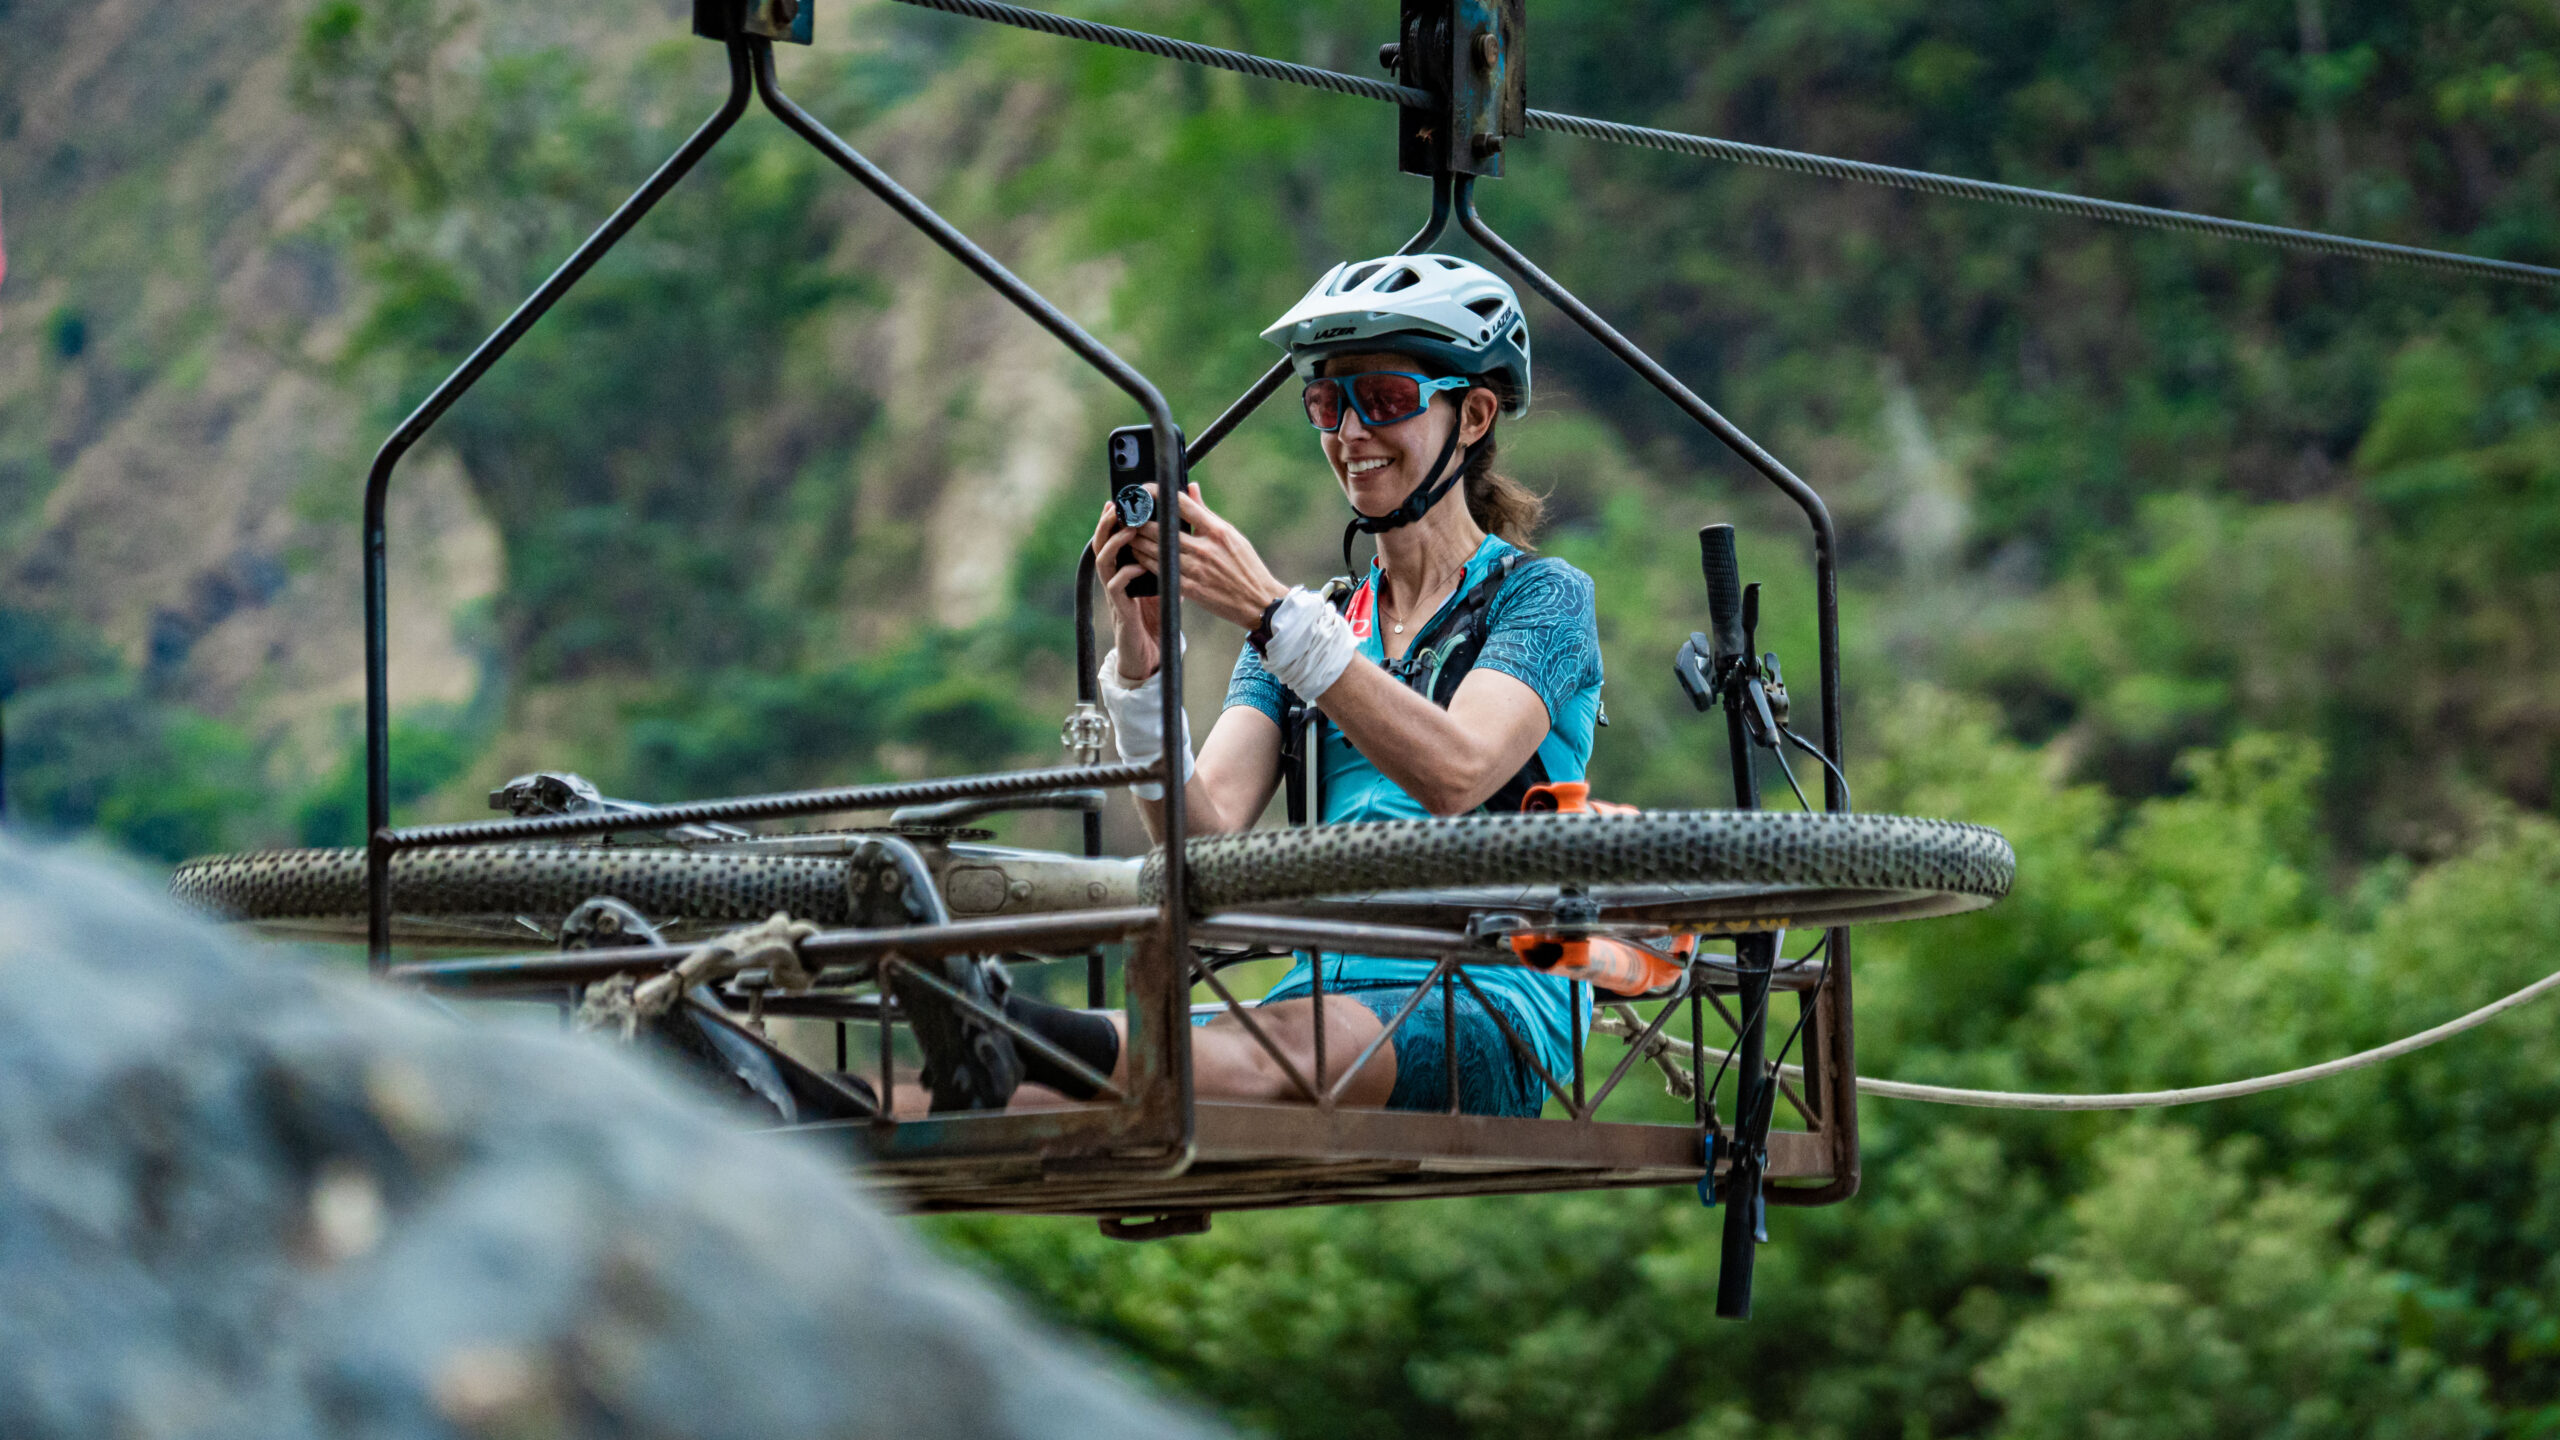 Jen Hanks making to final river crossing by cable cart. Photo courtesy of Machu Picchu Epic